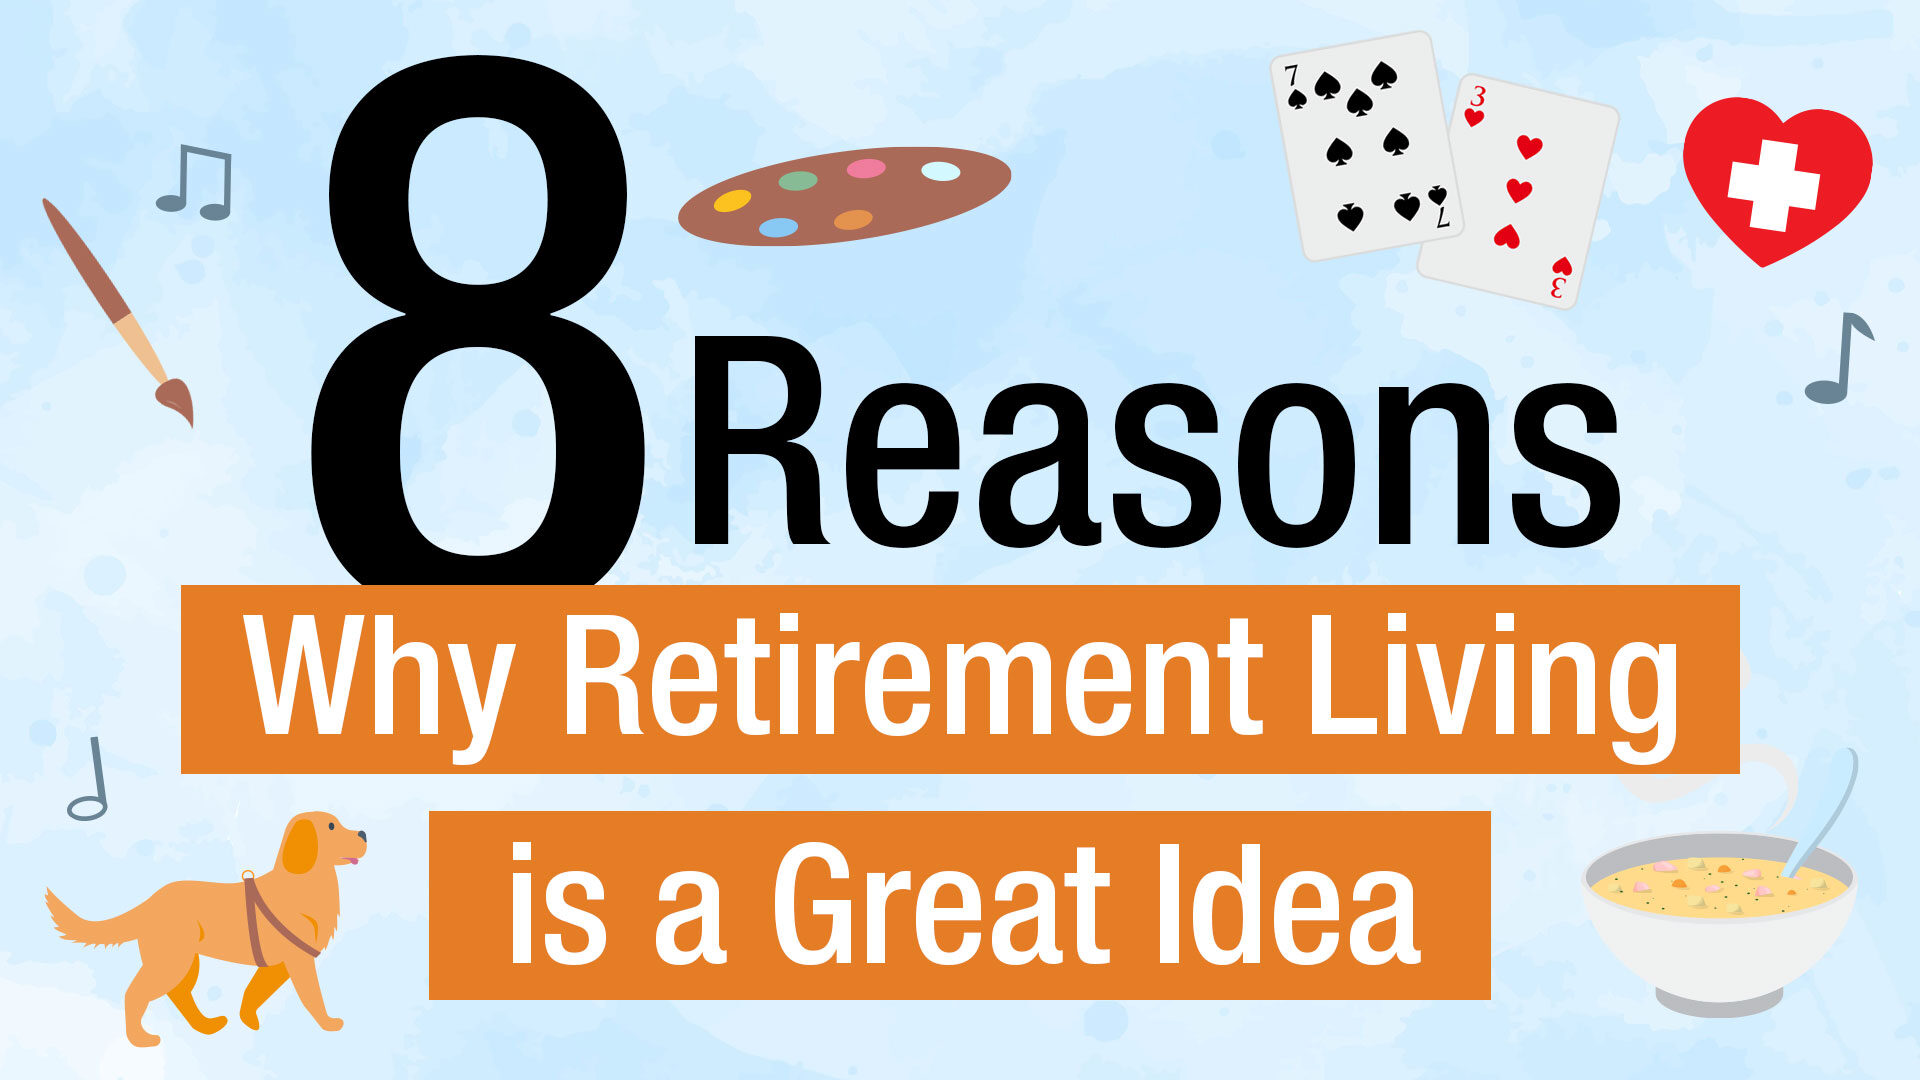 8 reasons retirement living is a great idea